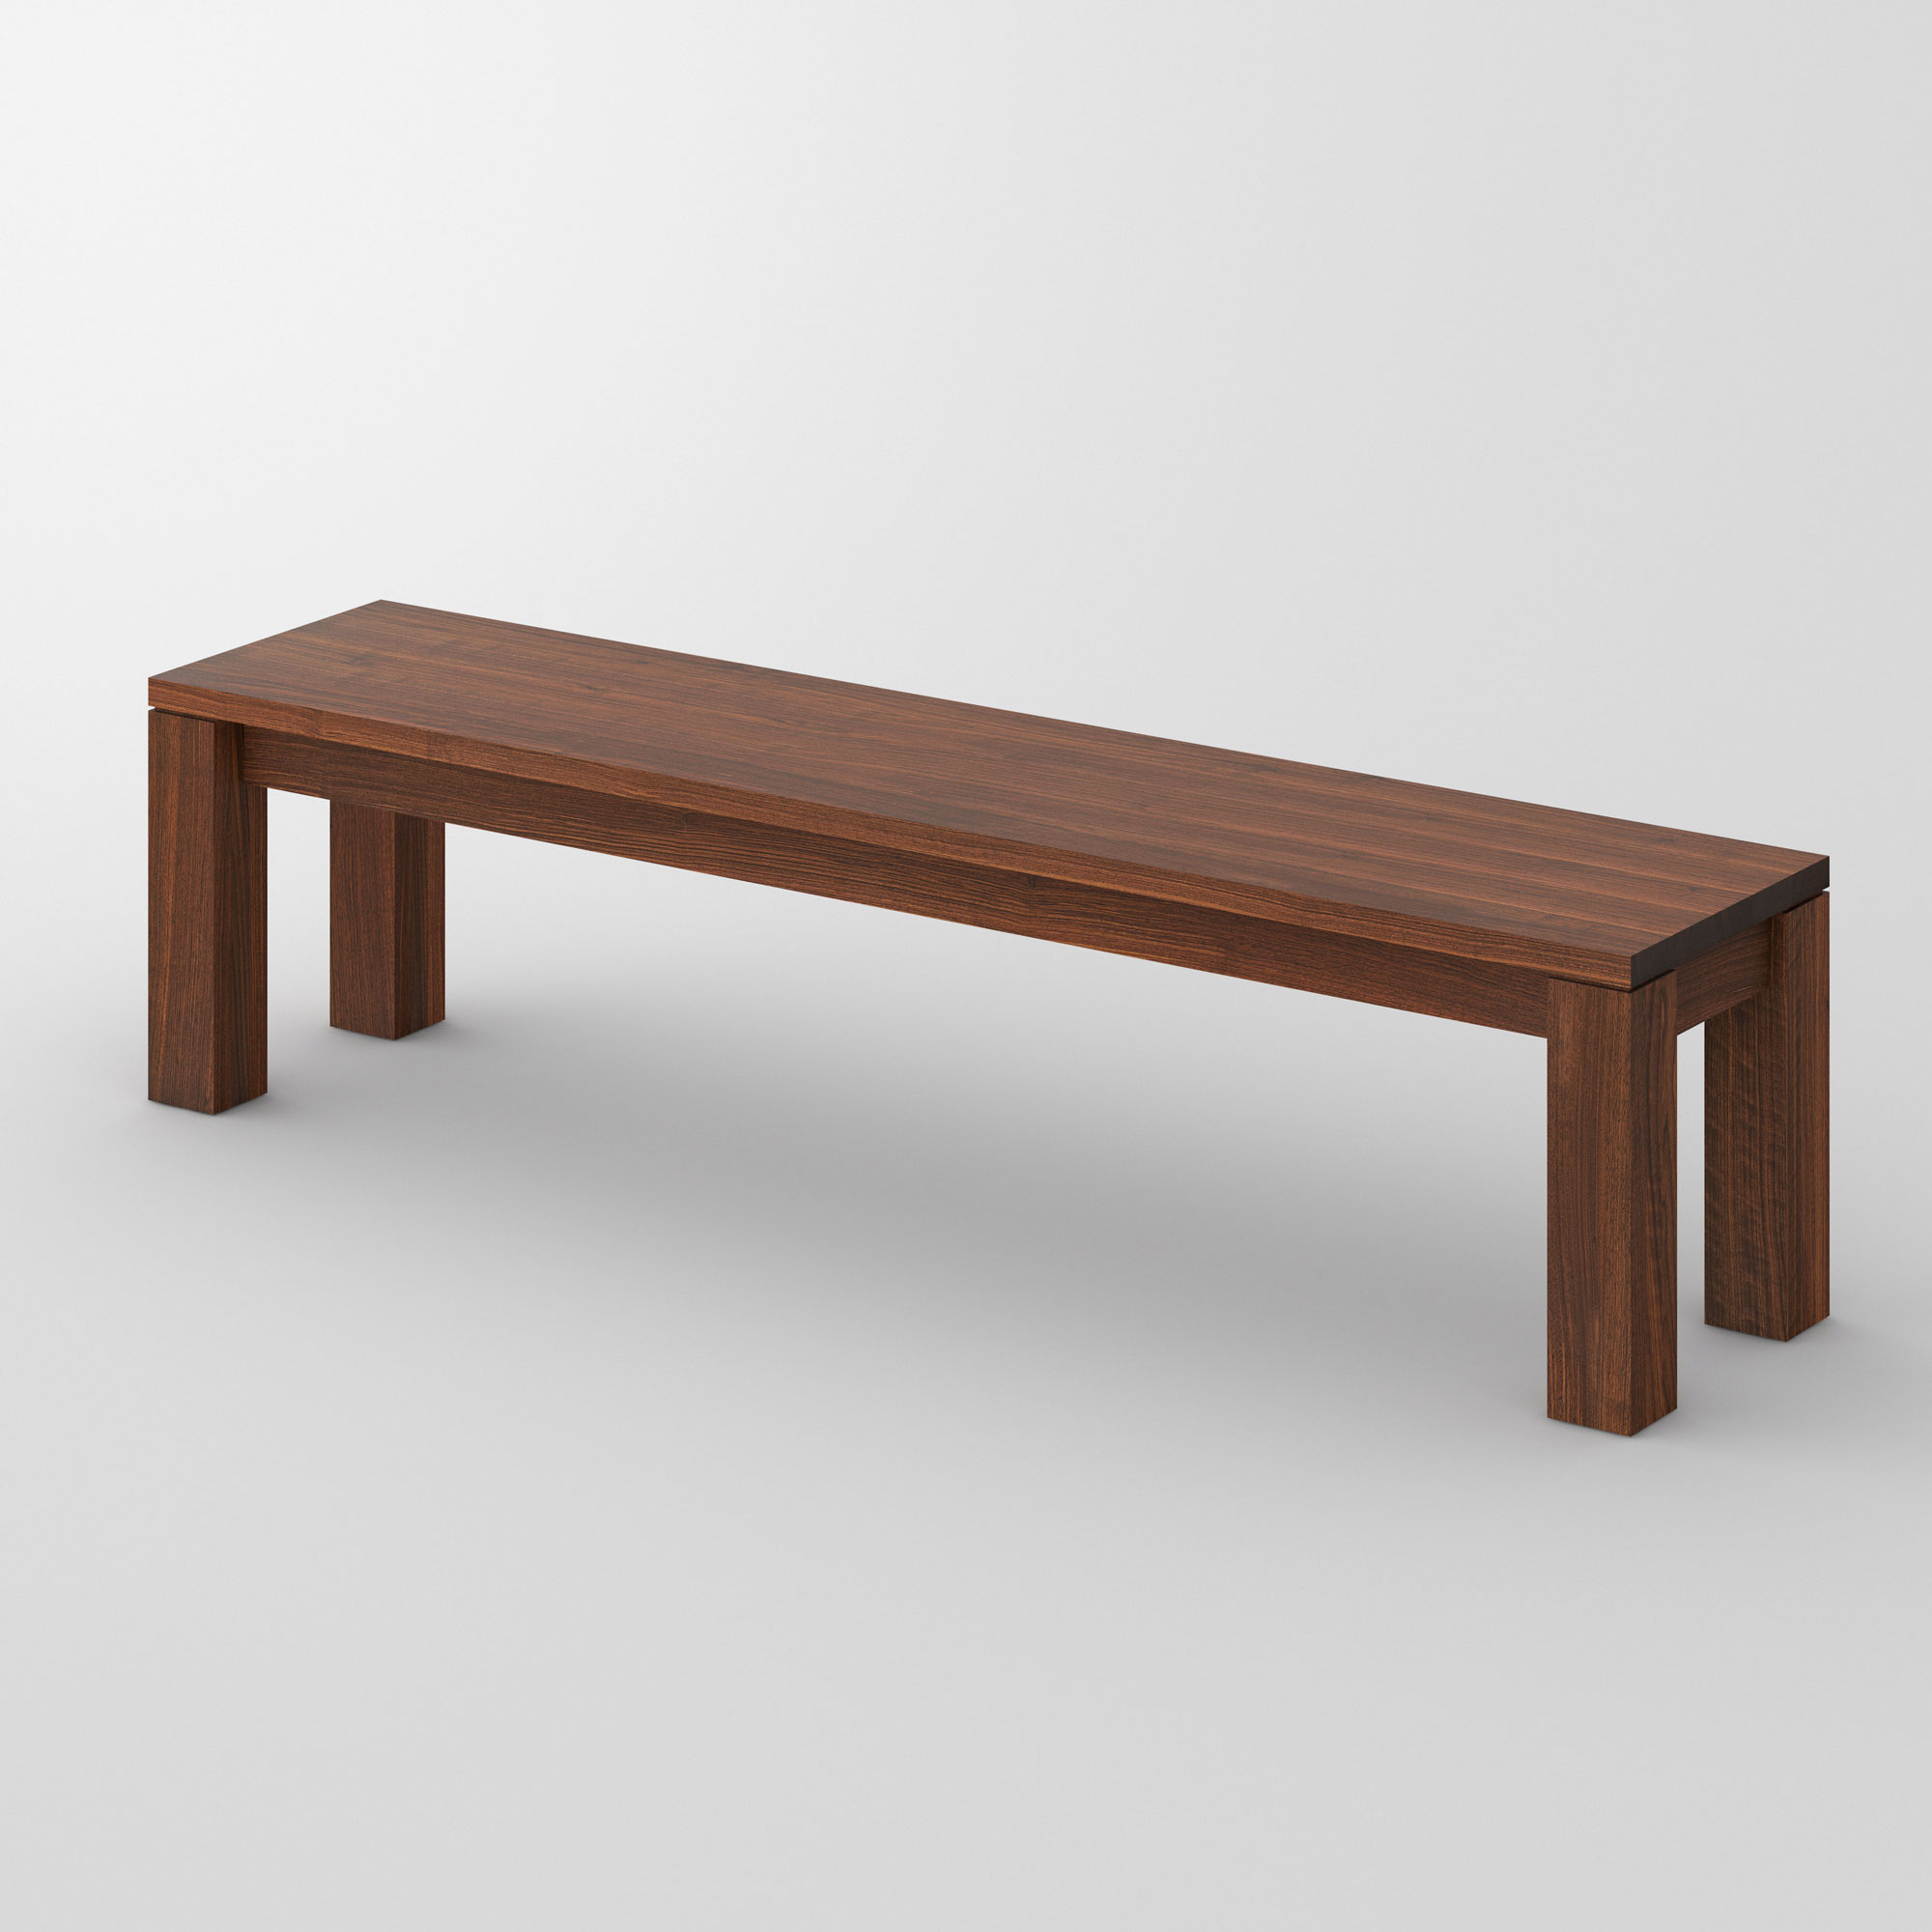 Wood Bench Rustic LIVING cam1 custom made in solid wood by vitamin design